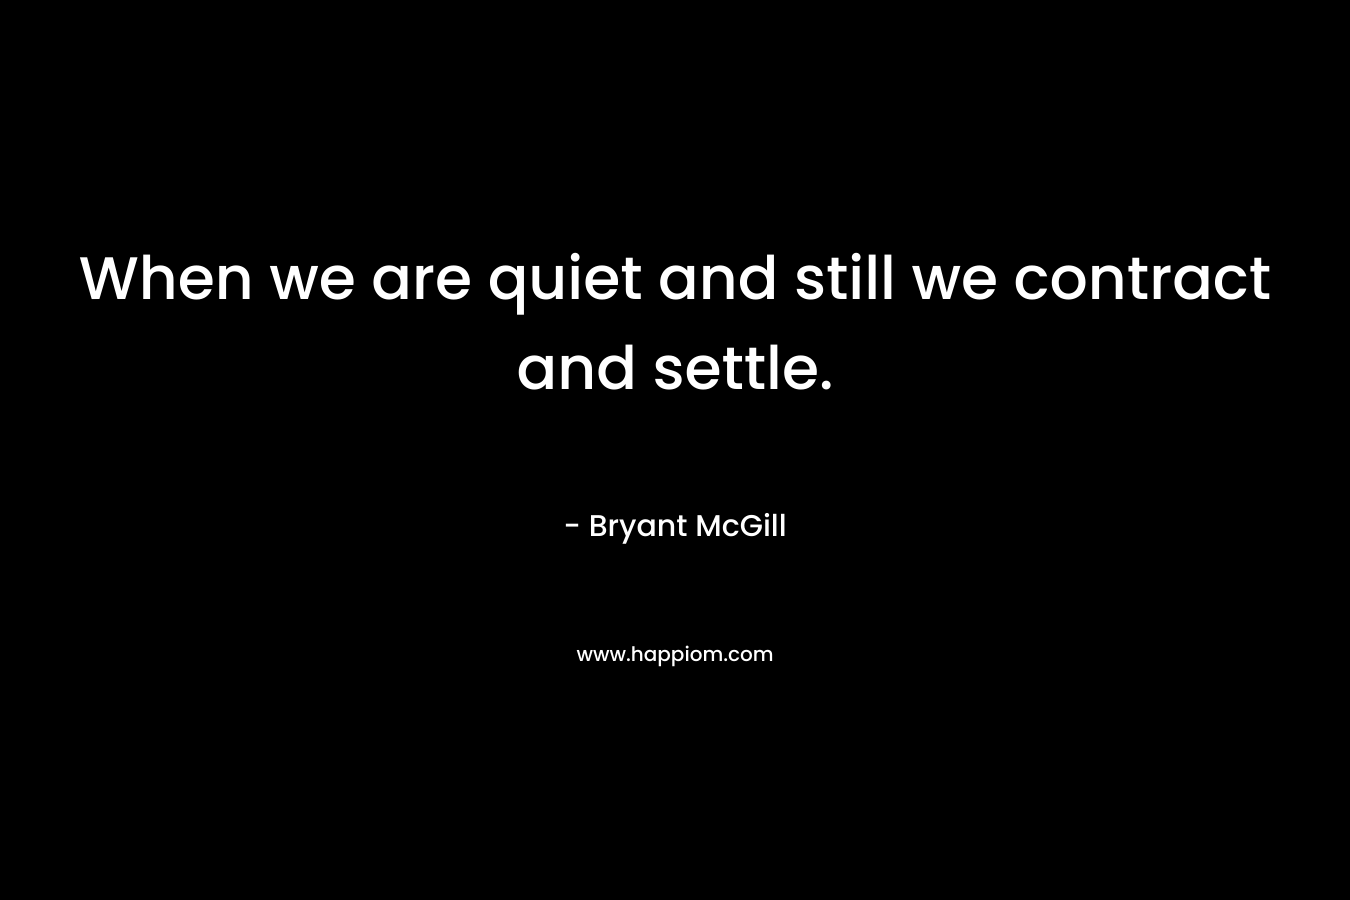 When we are quiet and still we contract and settle.